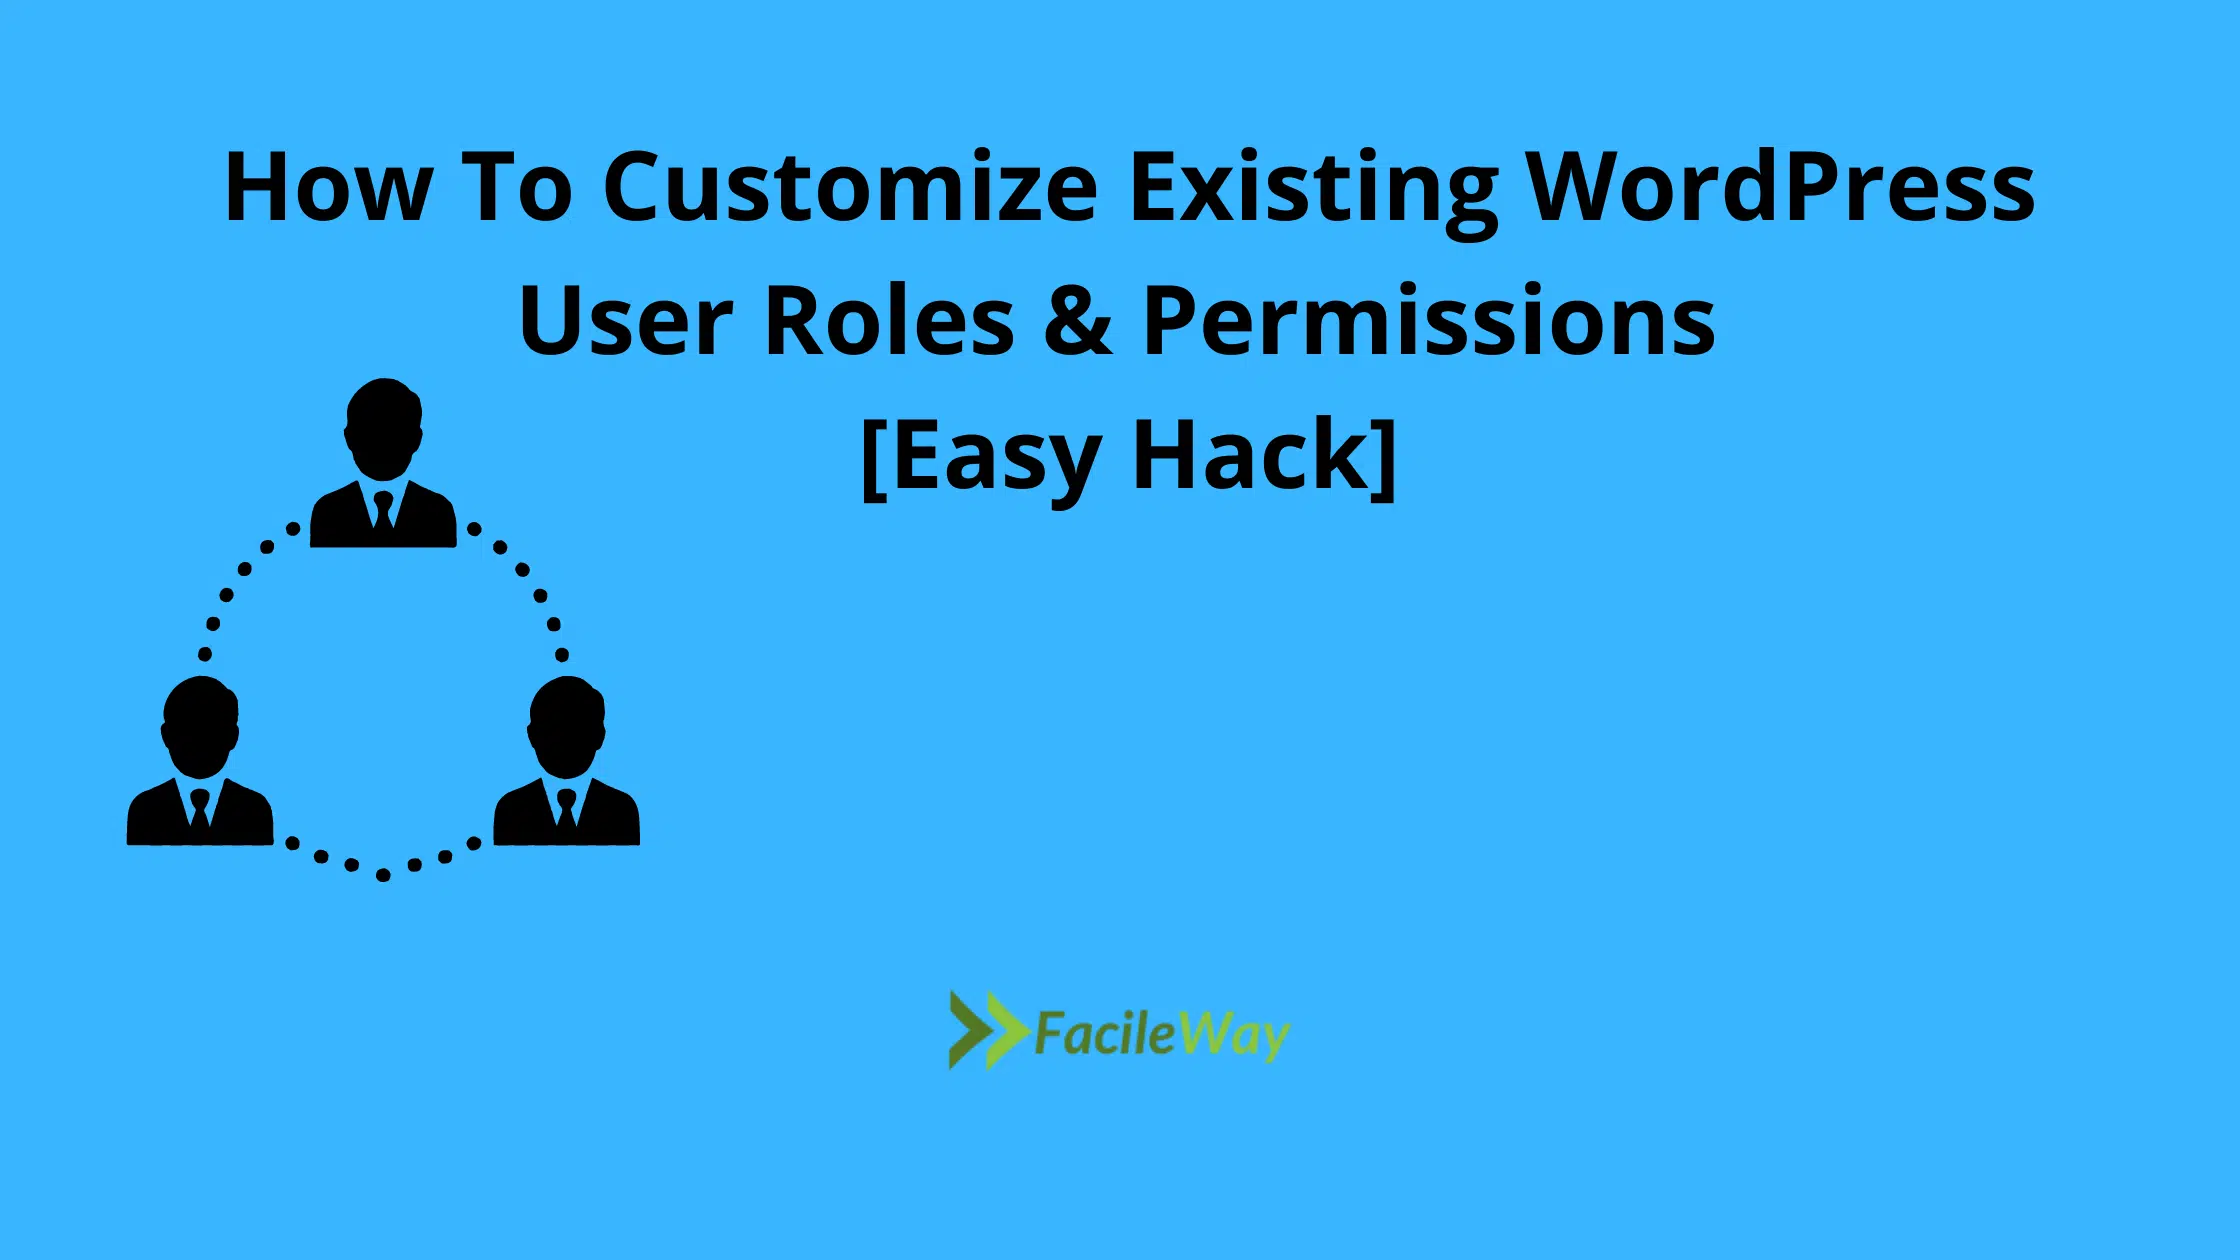 How To Customize Existing WordPress User Roles & Permissions [Easy Hack]